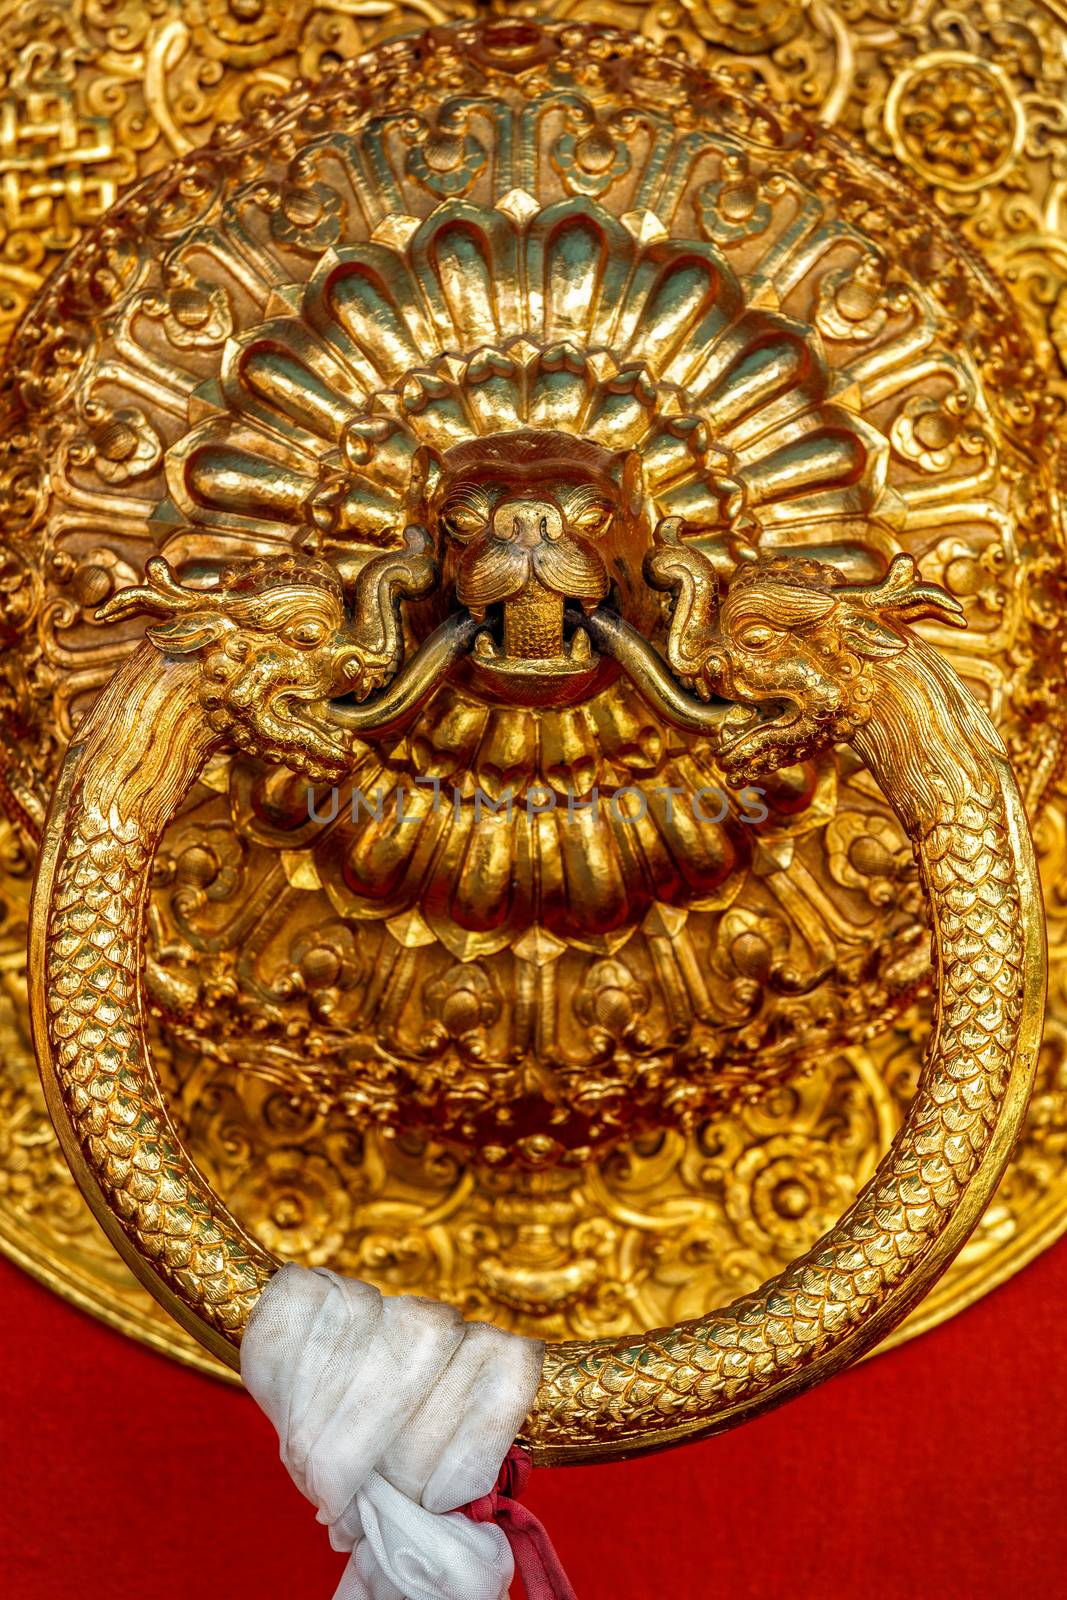 Lion shaped door handle in Buddhist temple by dimol